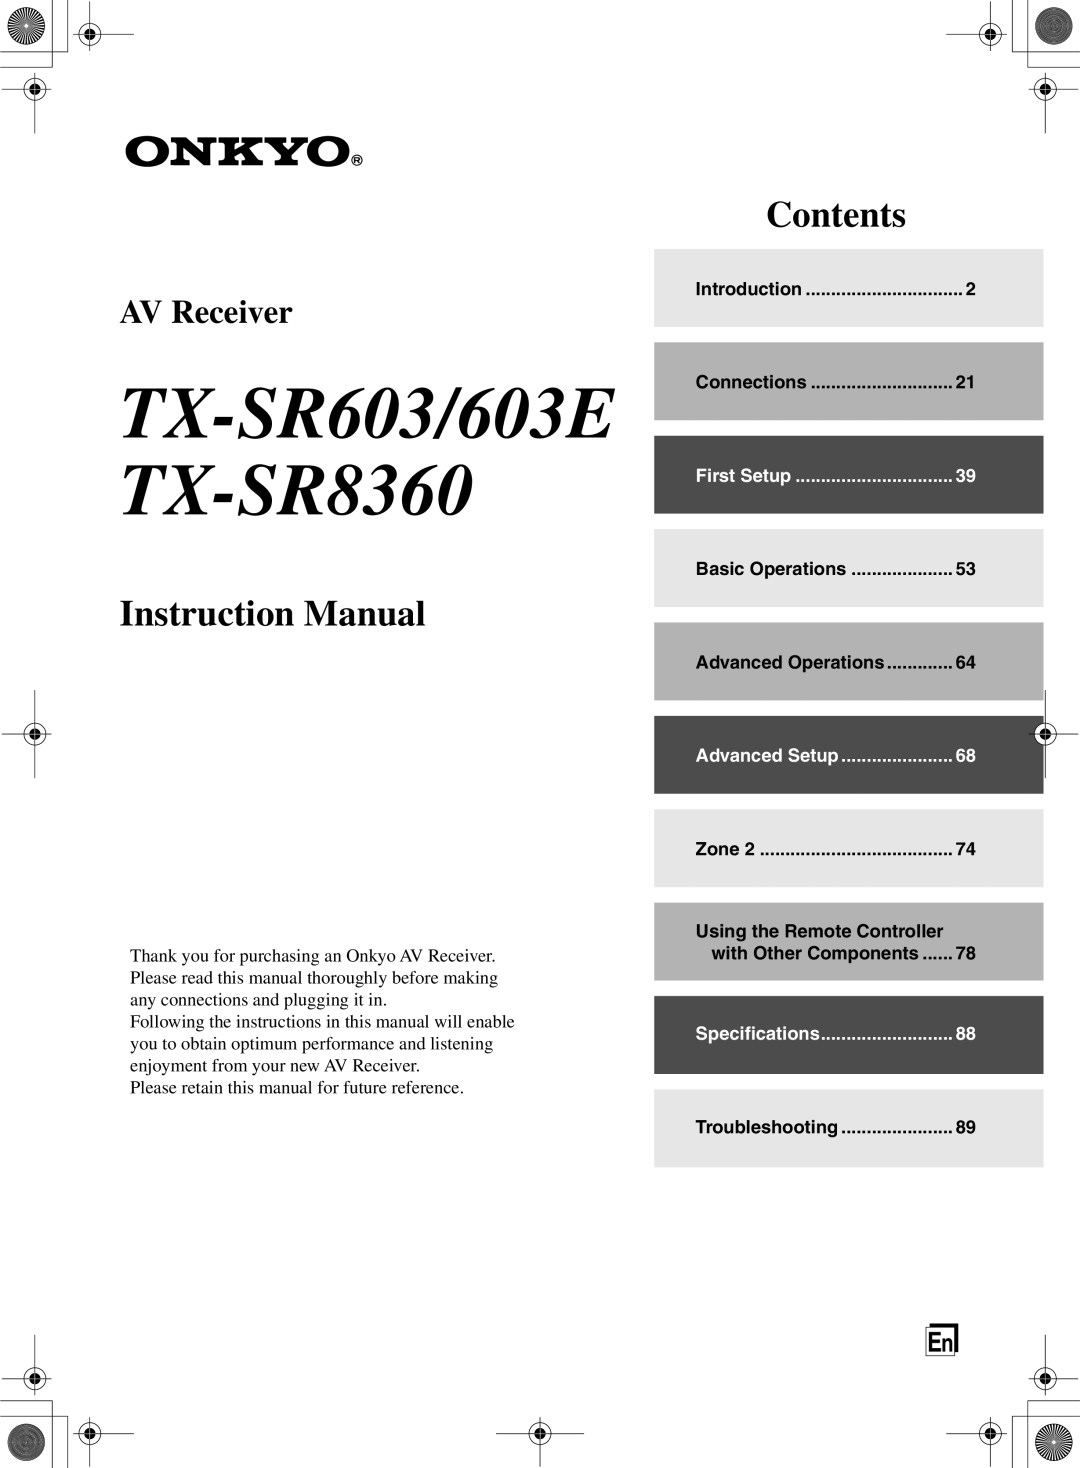 Onkyo instruction manual Using the Remote Controller, with Other Components, TX-SR603/603E TX-SR8360, Contents 